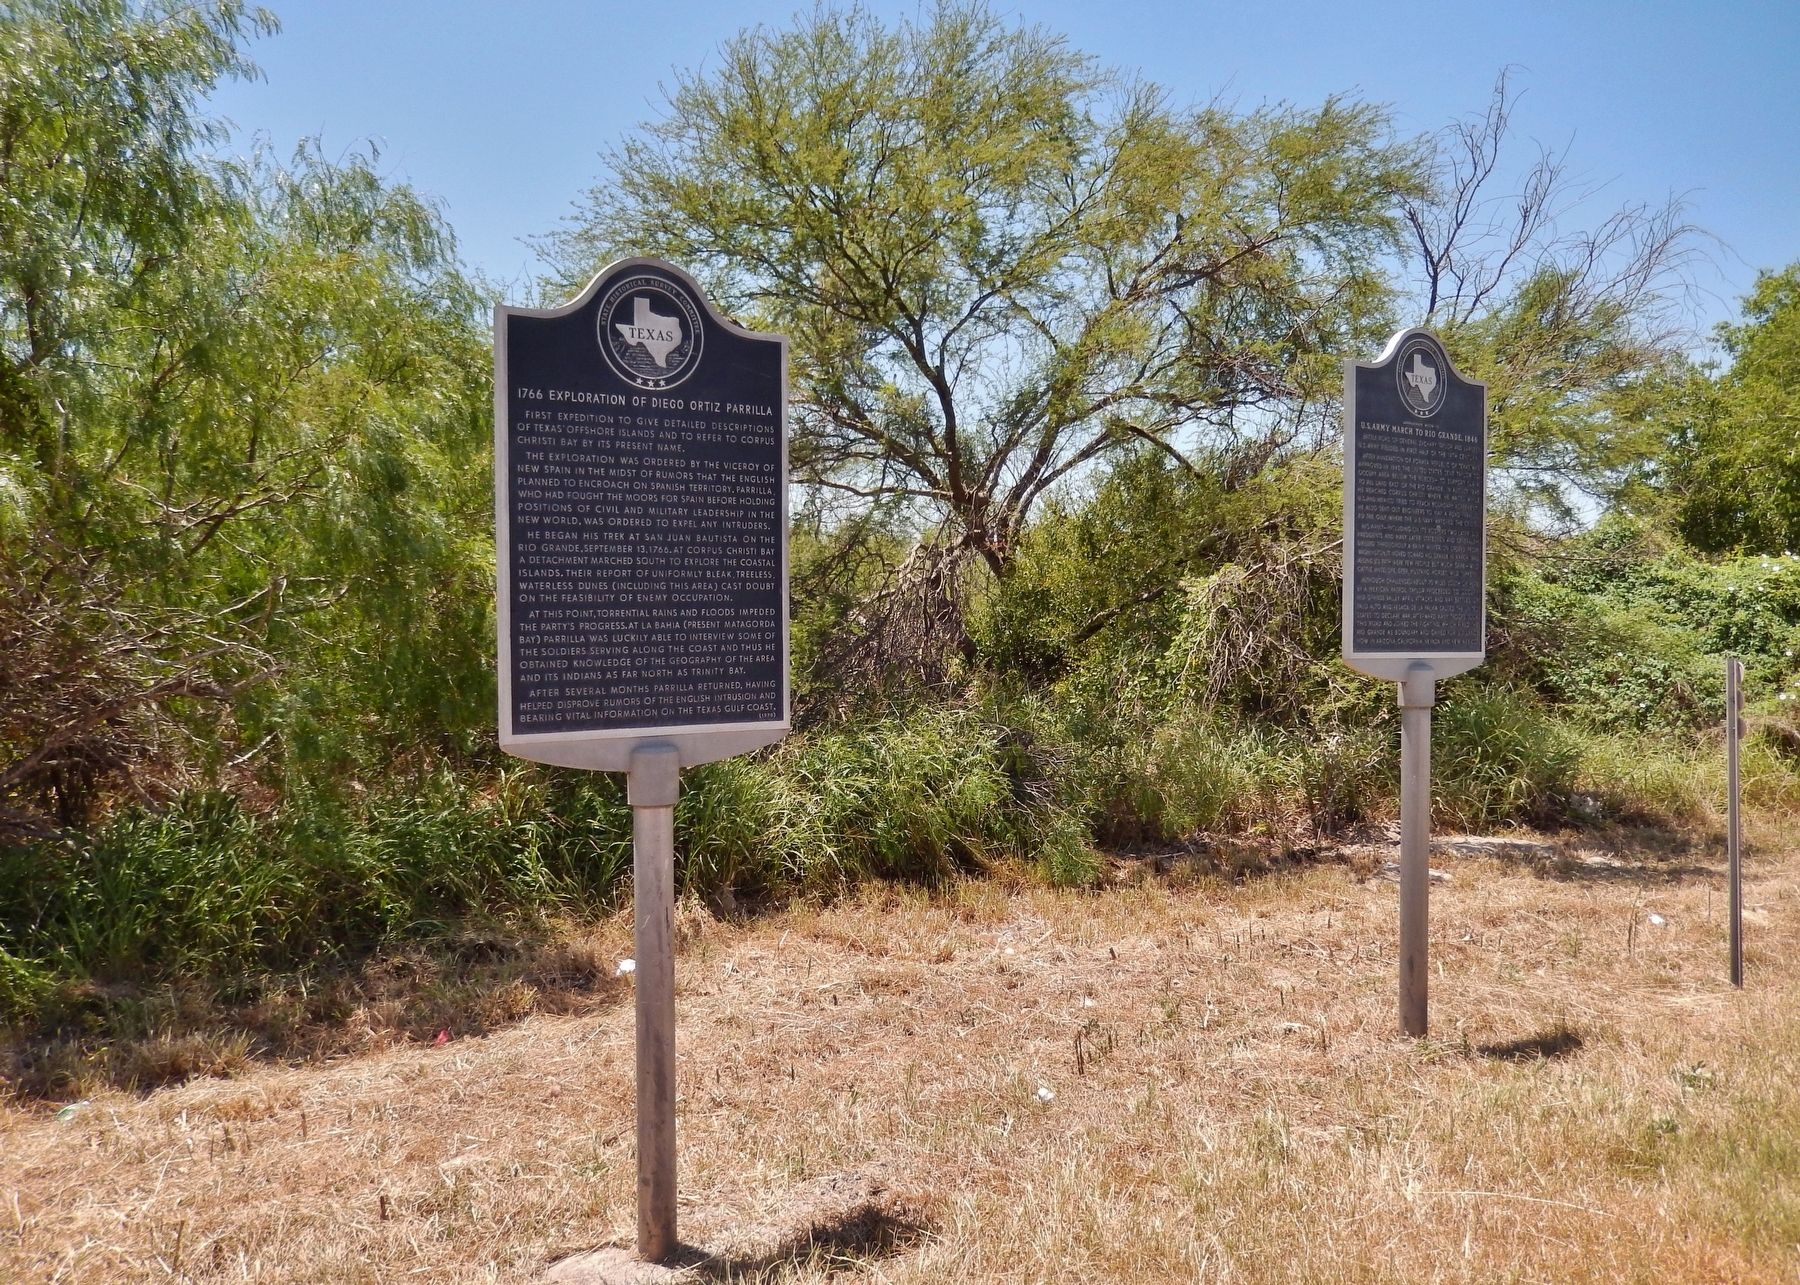 1766 Exploration of Diego Ortiz Parilla Marker (<i>wide view; unrelated marker at right</i>) image. Click for full size.